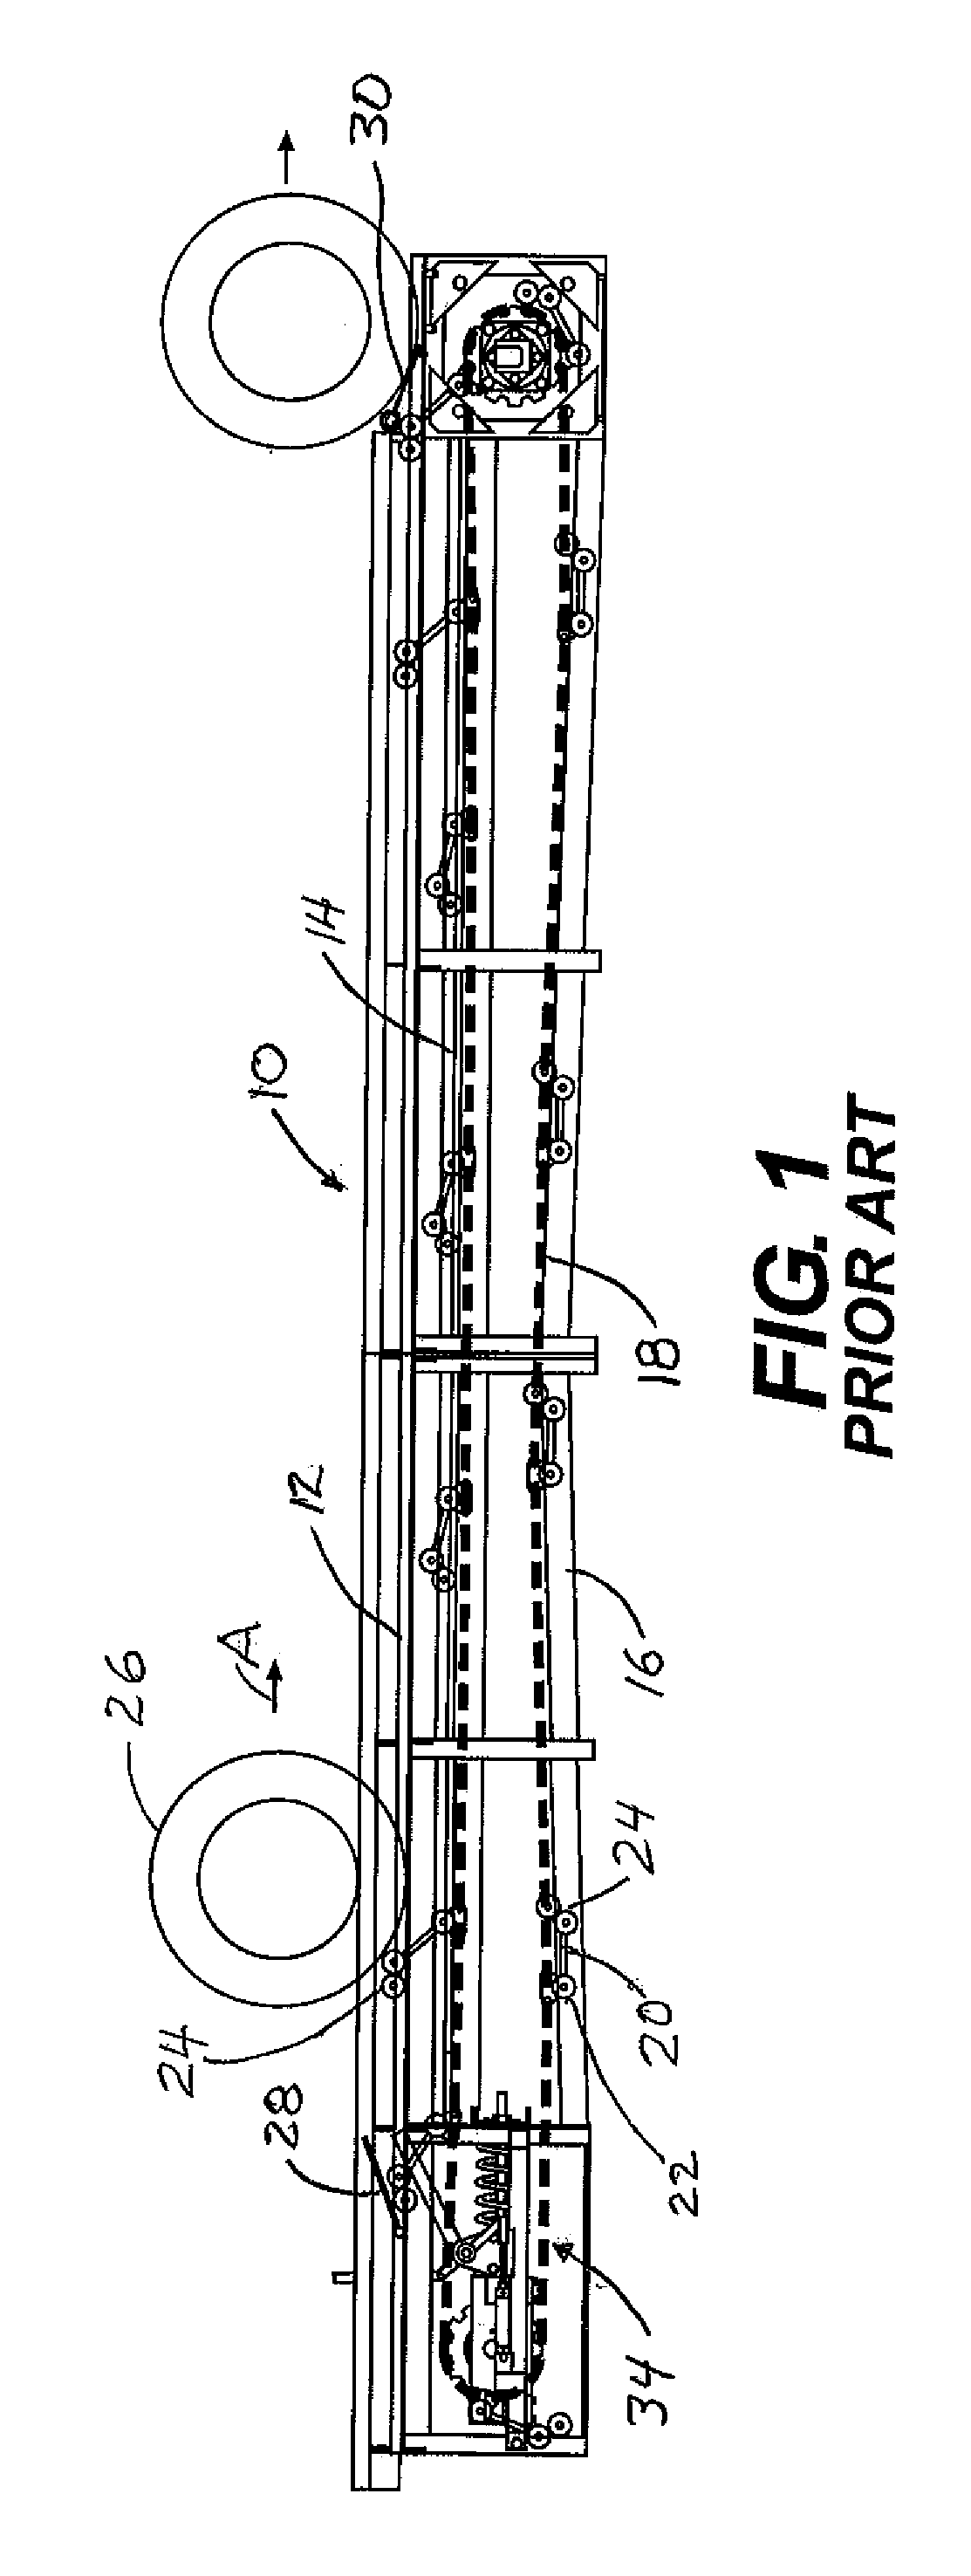 Roller assembly call up mechanism for a vehicle wash conveyor